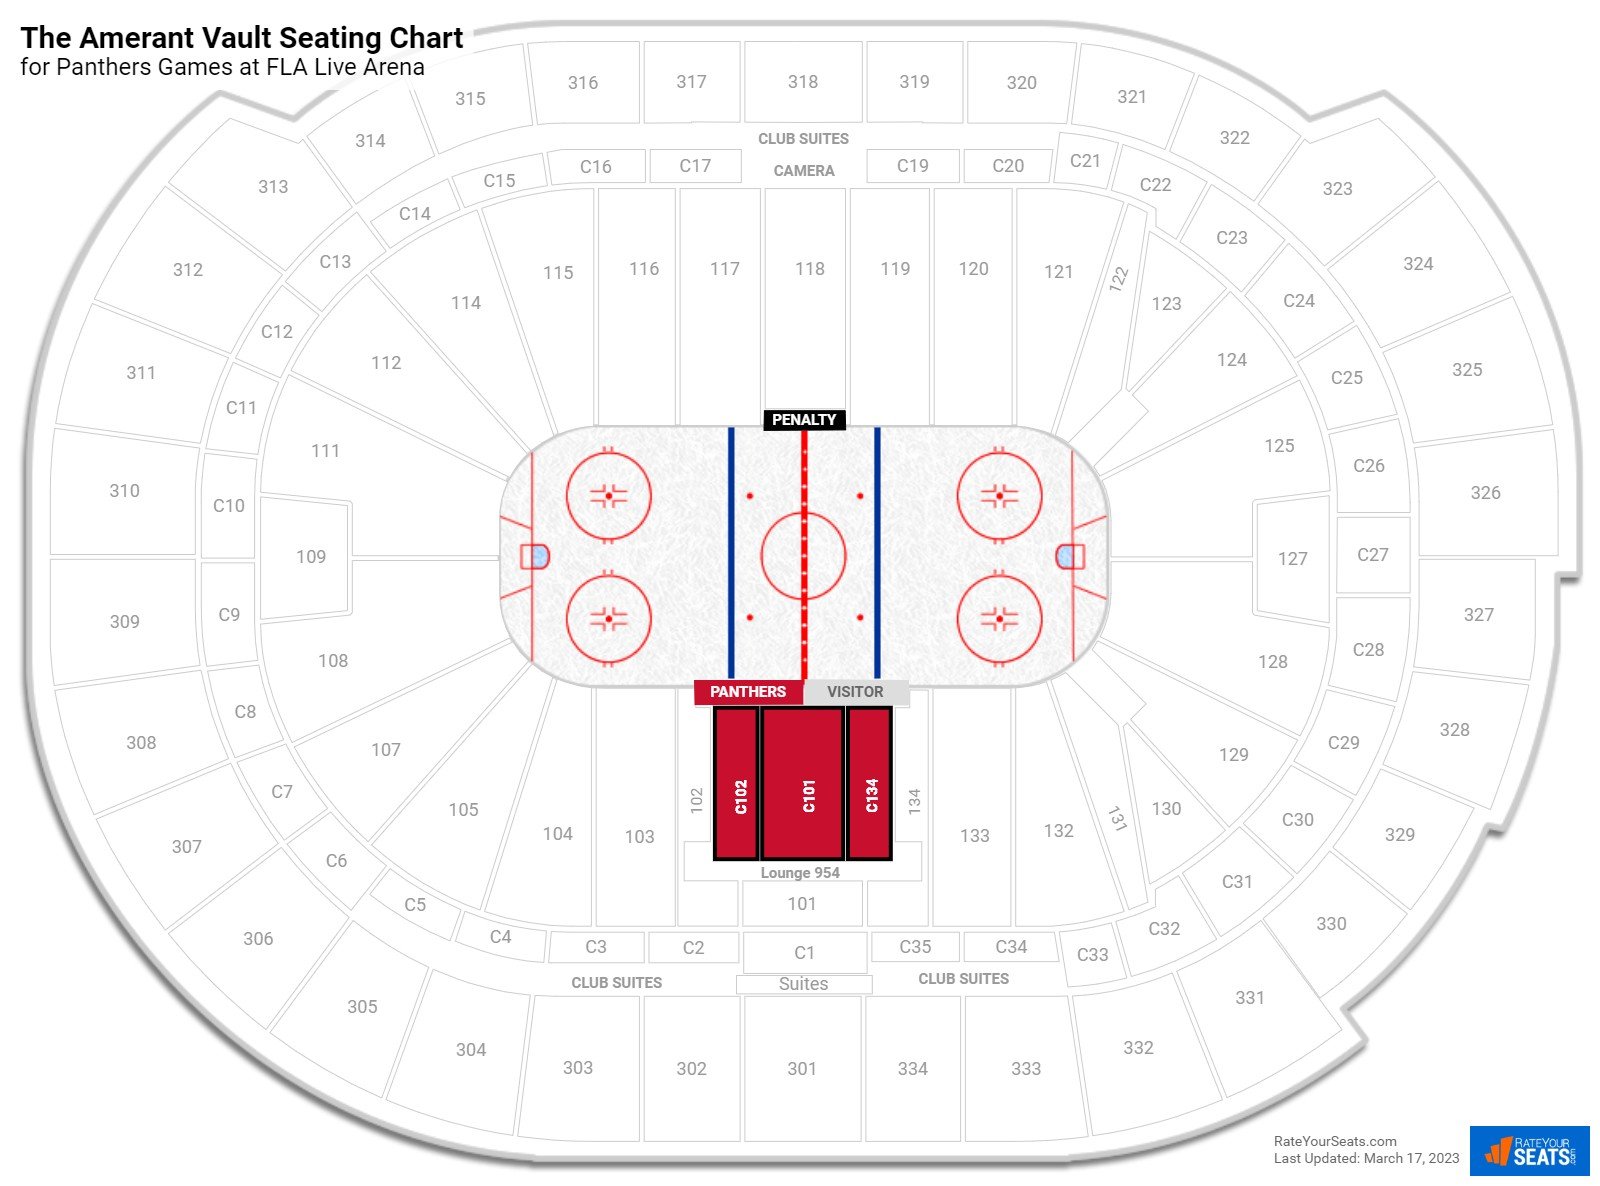 Panthers Lounge 954 Seating Chart at FLA Live Arena